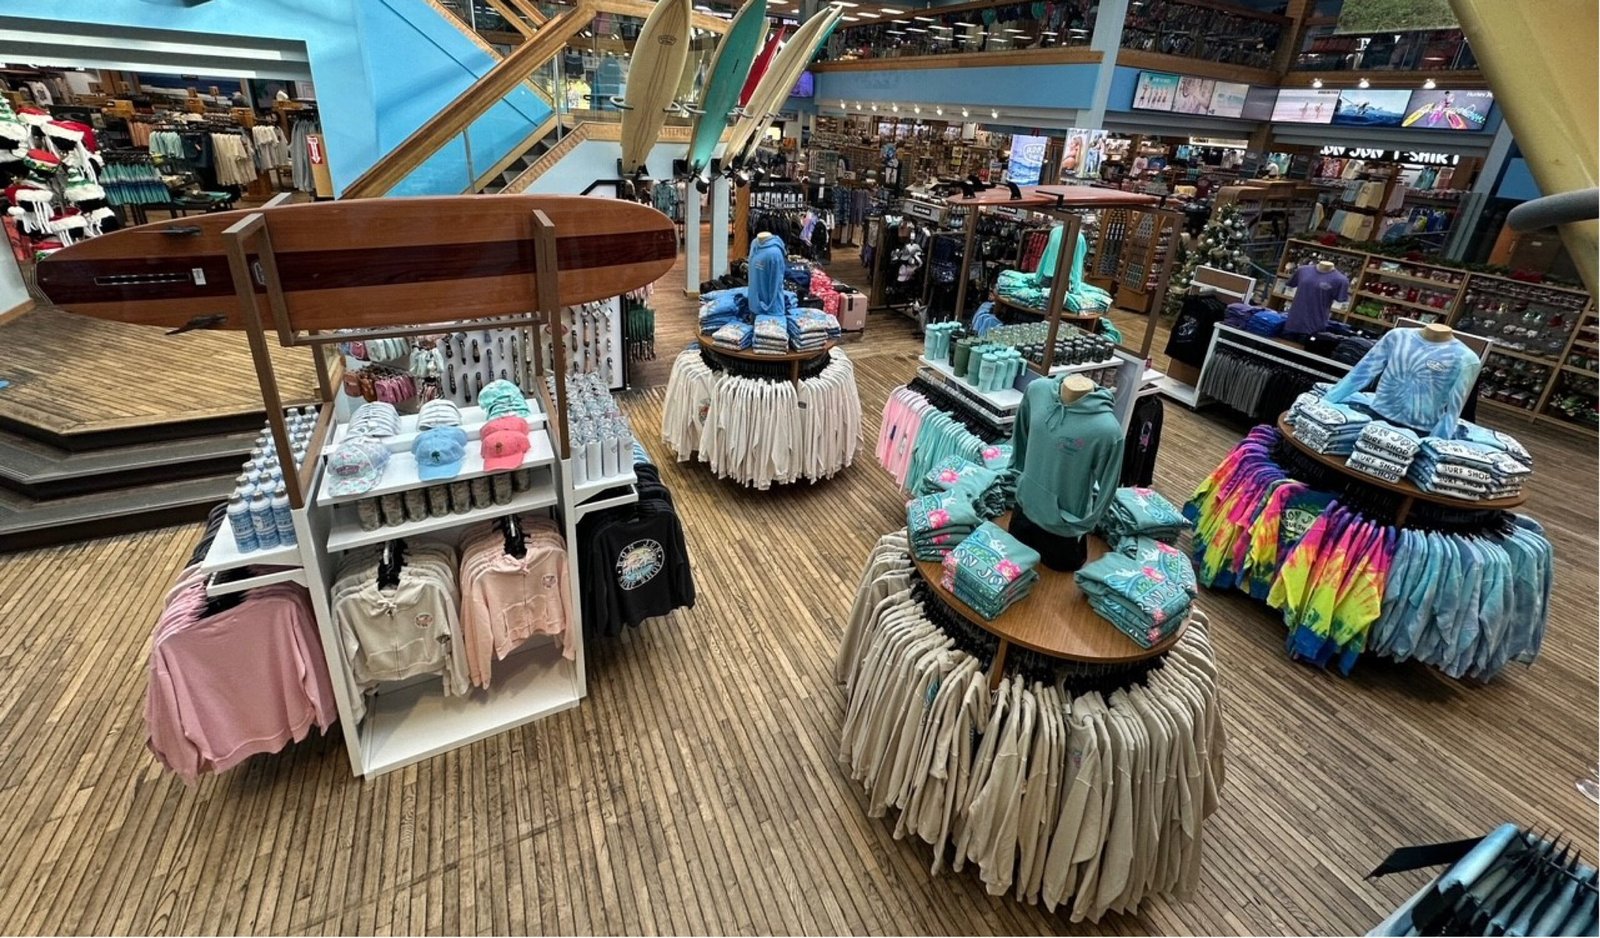 Ron Jon Surf Shop interior with racks of clothing and bamboo floor. Surfboard sits over top of clothing rack.